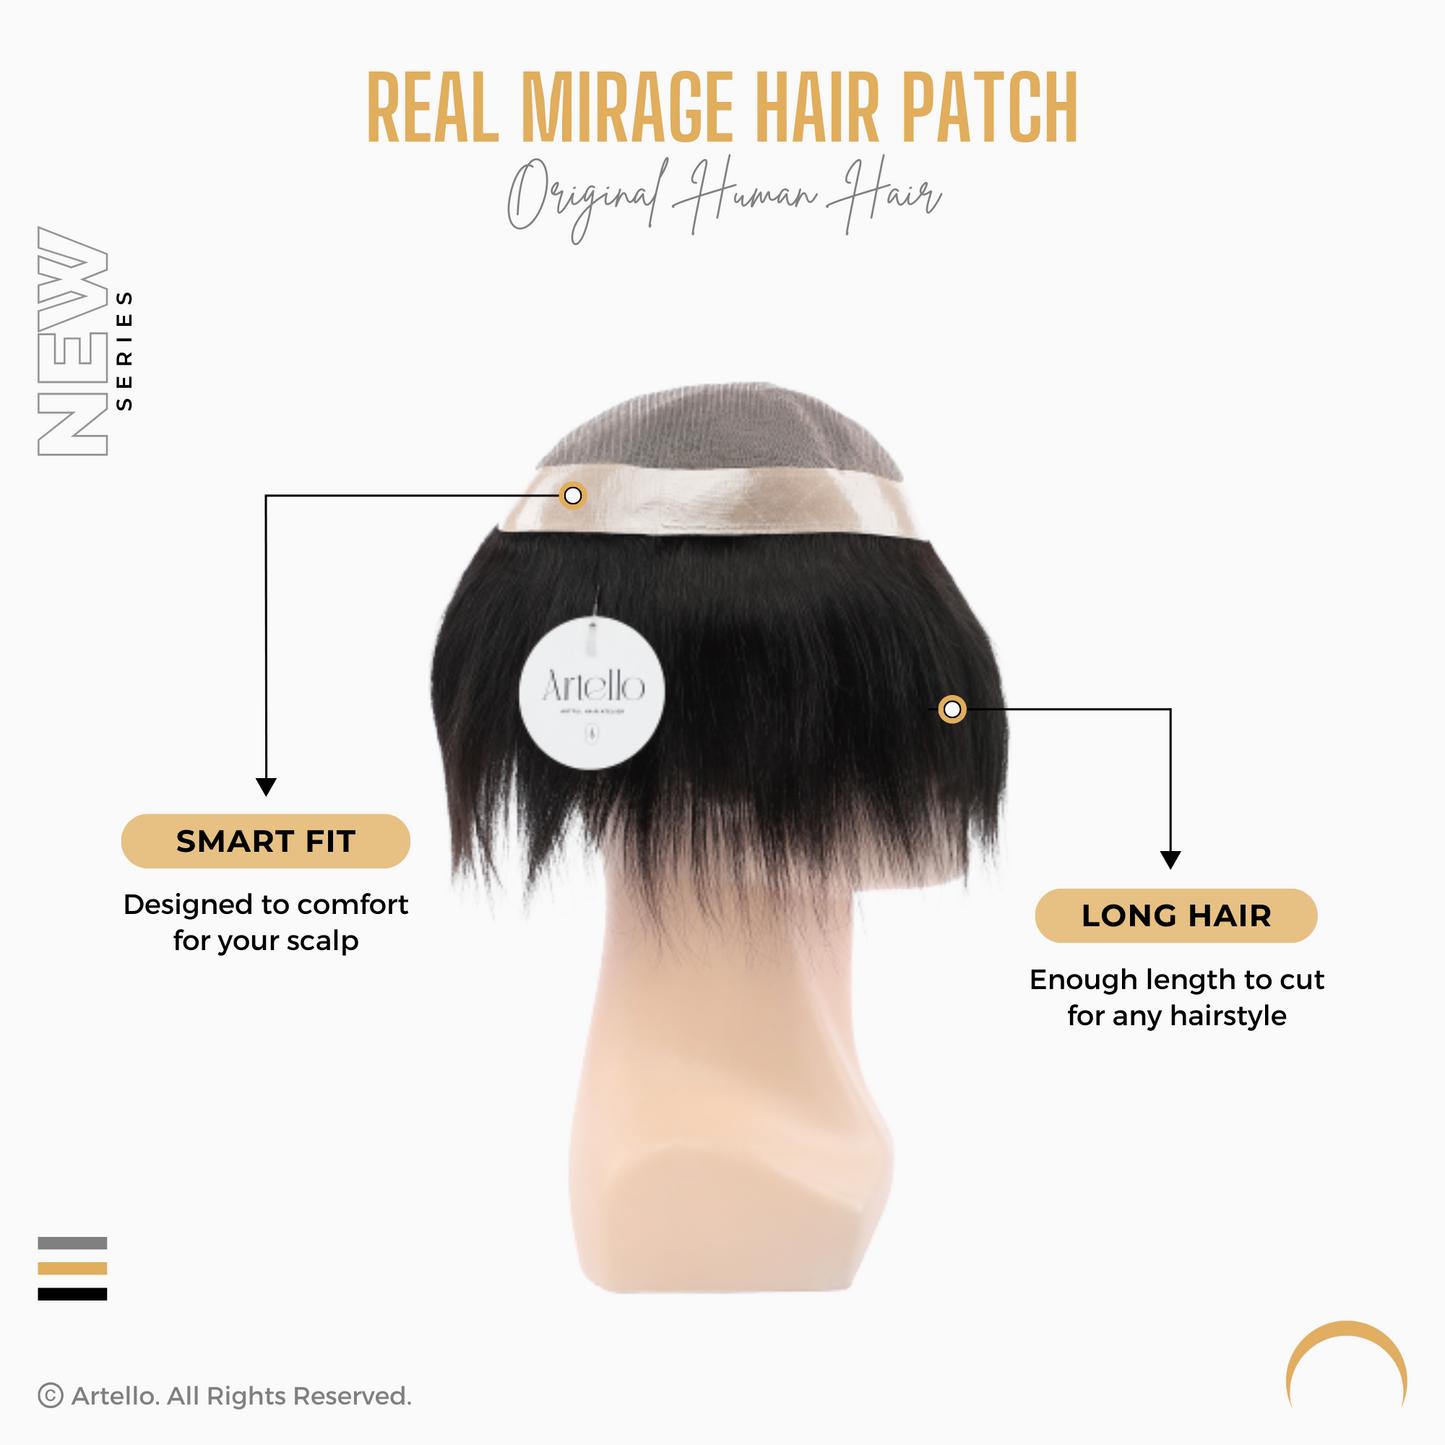 Artello REAL MIRAGE Hair Patch for Men